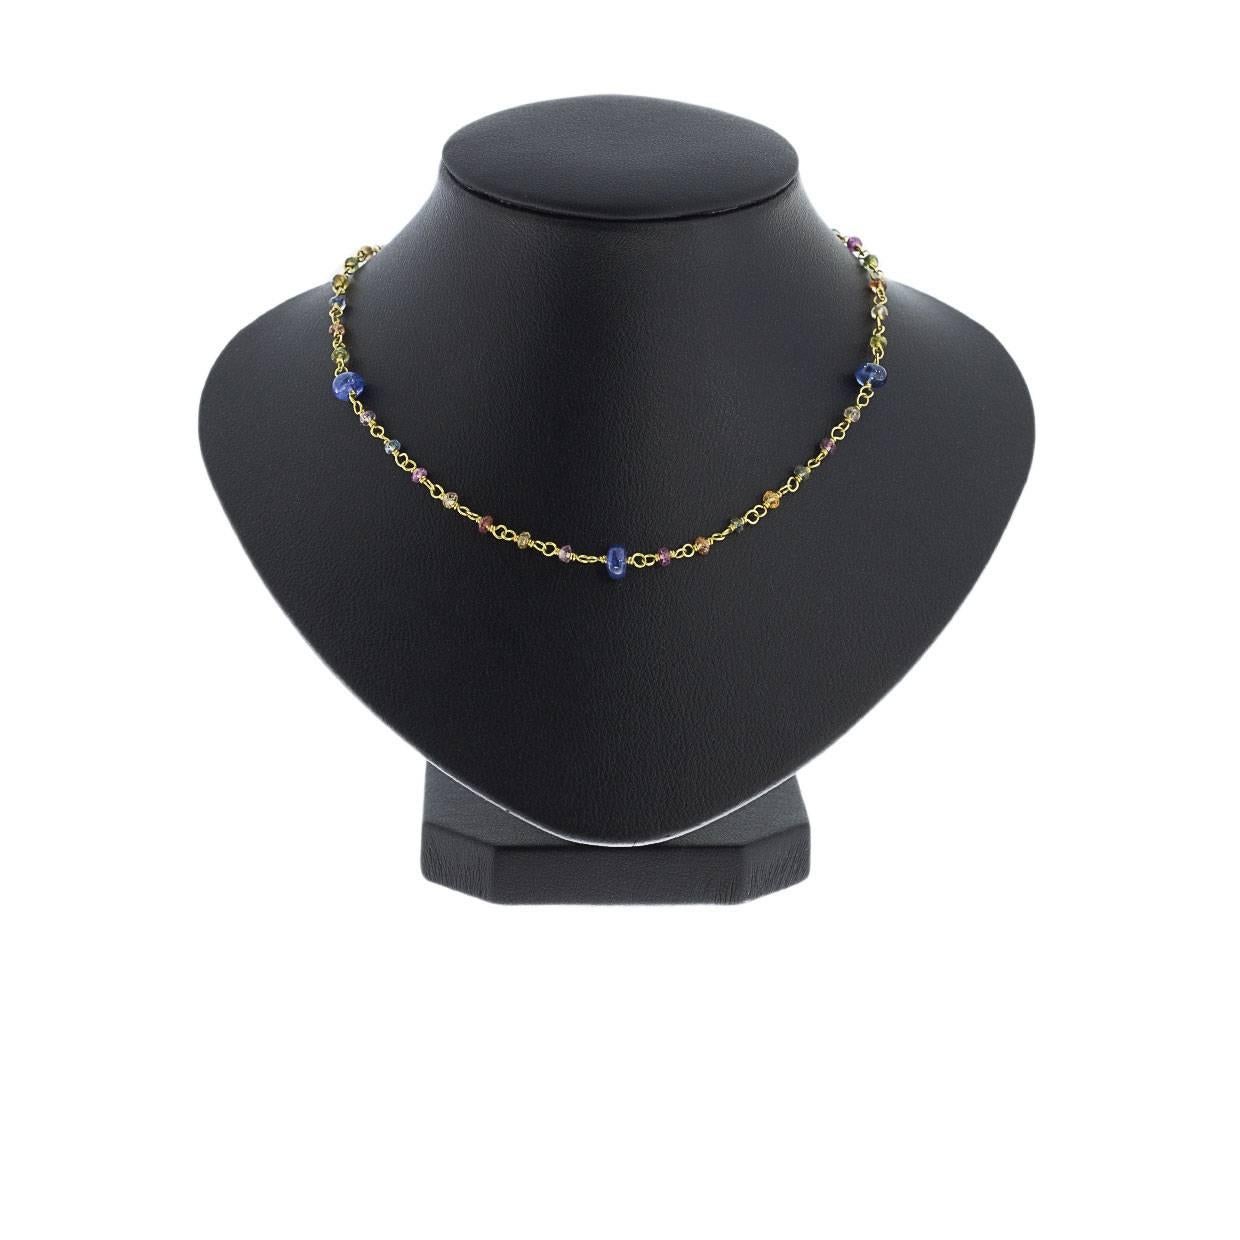 This Mallary Marks sapphire necklace features tiny, faceted beads wrapped in gold. This necklace can be paired with everything from basics to more elegant looks!

DETAILS:
22K Yellow Gold
Mallary Marks
Sapphire Chain necklace
16 inches long
MSRP